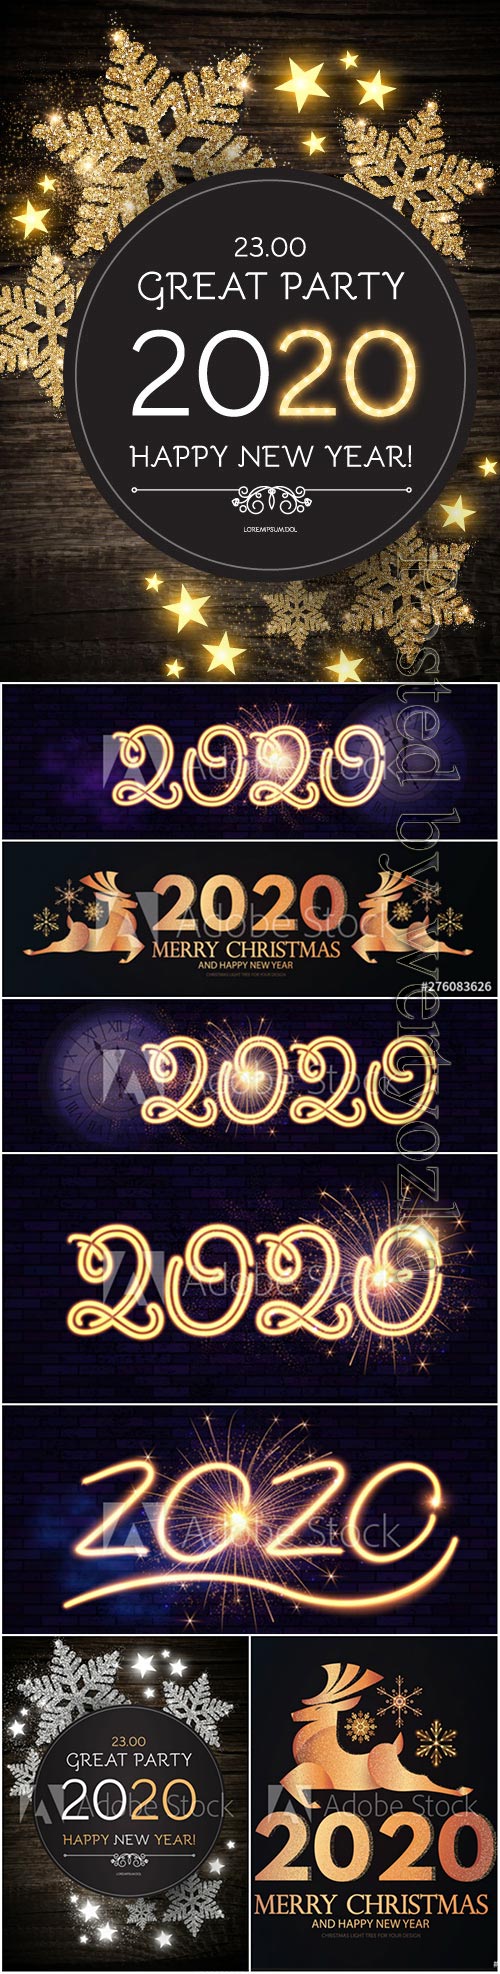 2020 Christmas and New Year vector backgrounds with golden